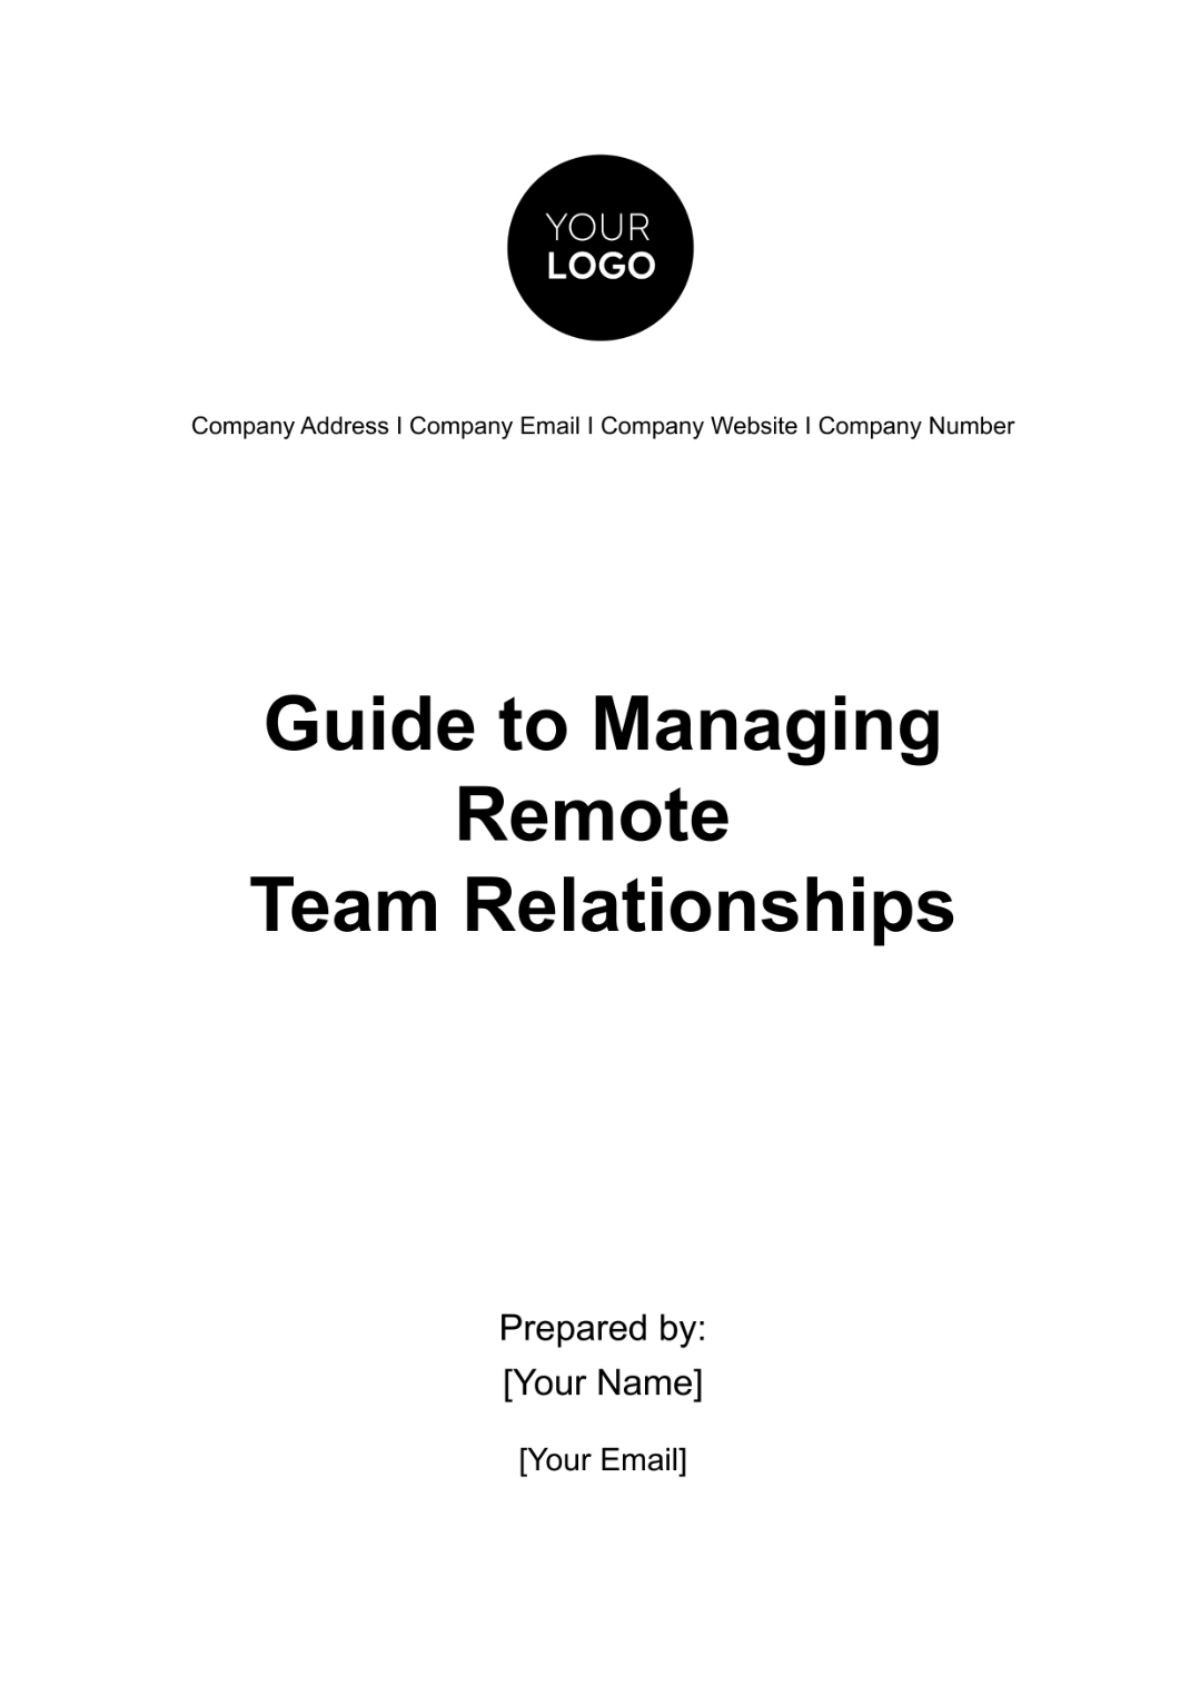 Guide to Managing Remote Team Relationships HR Template